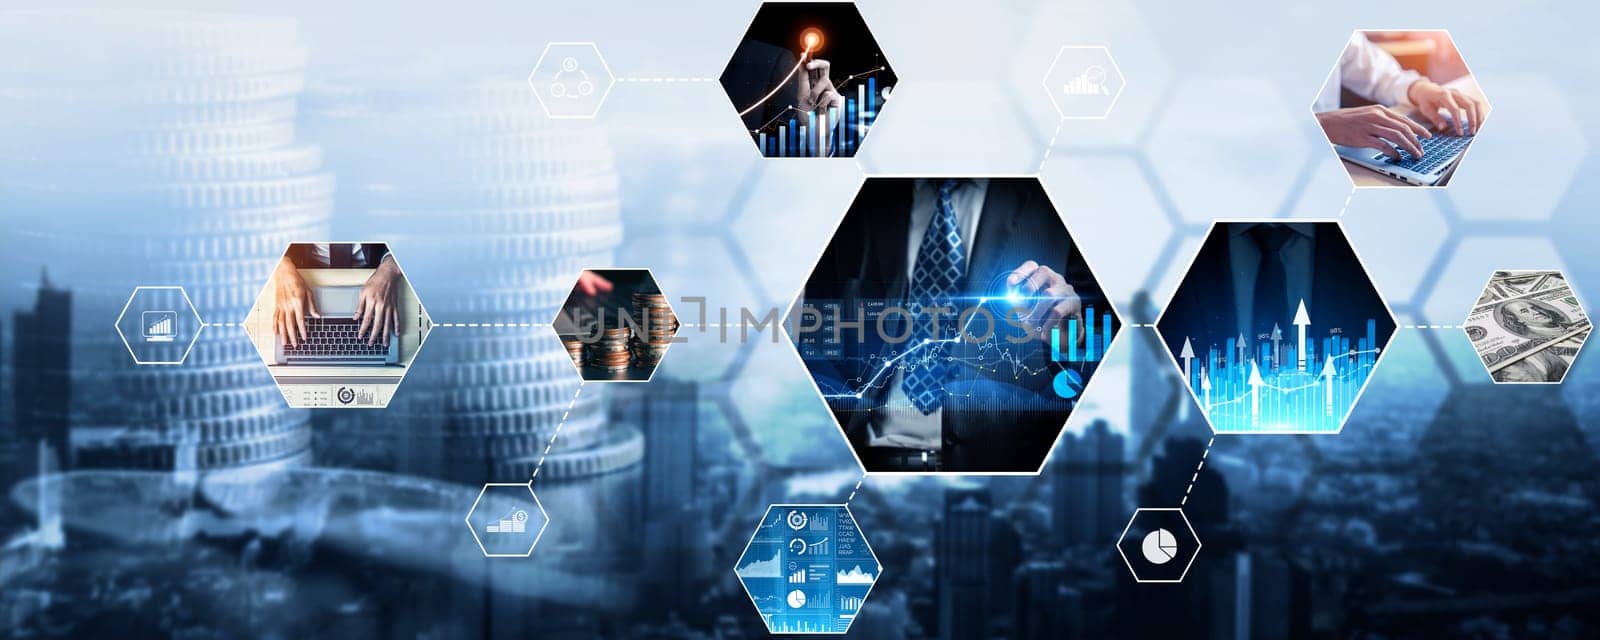 Futuristic business digital financial data technology and big data kudos concept by biancoblue